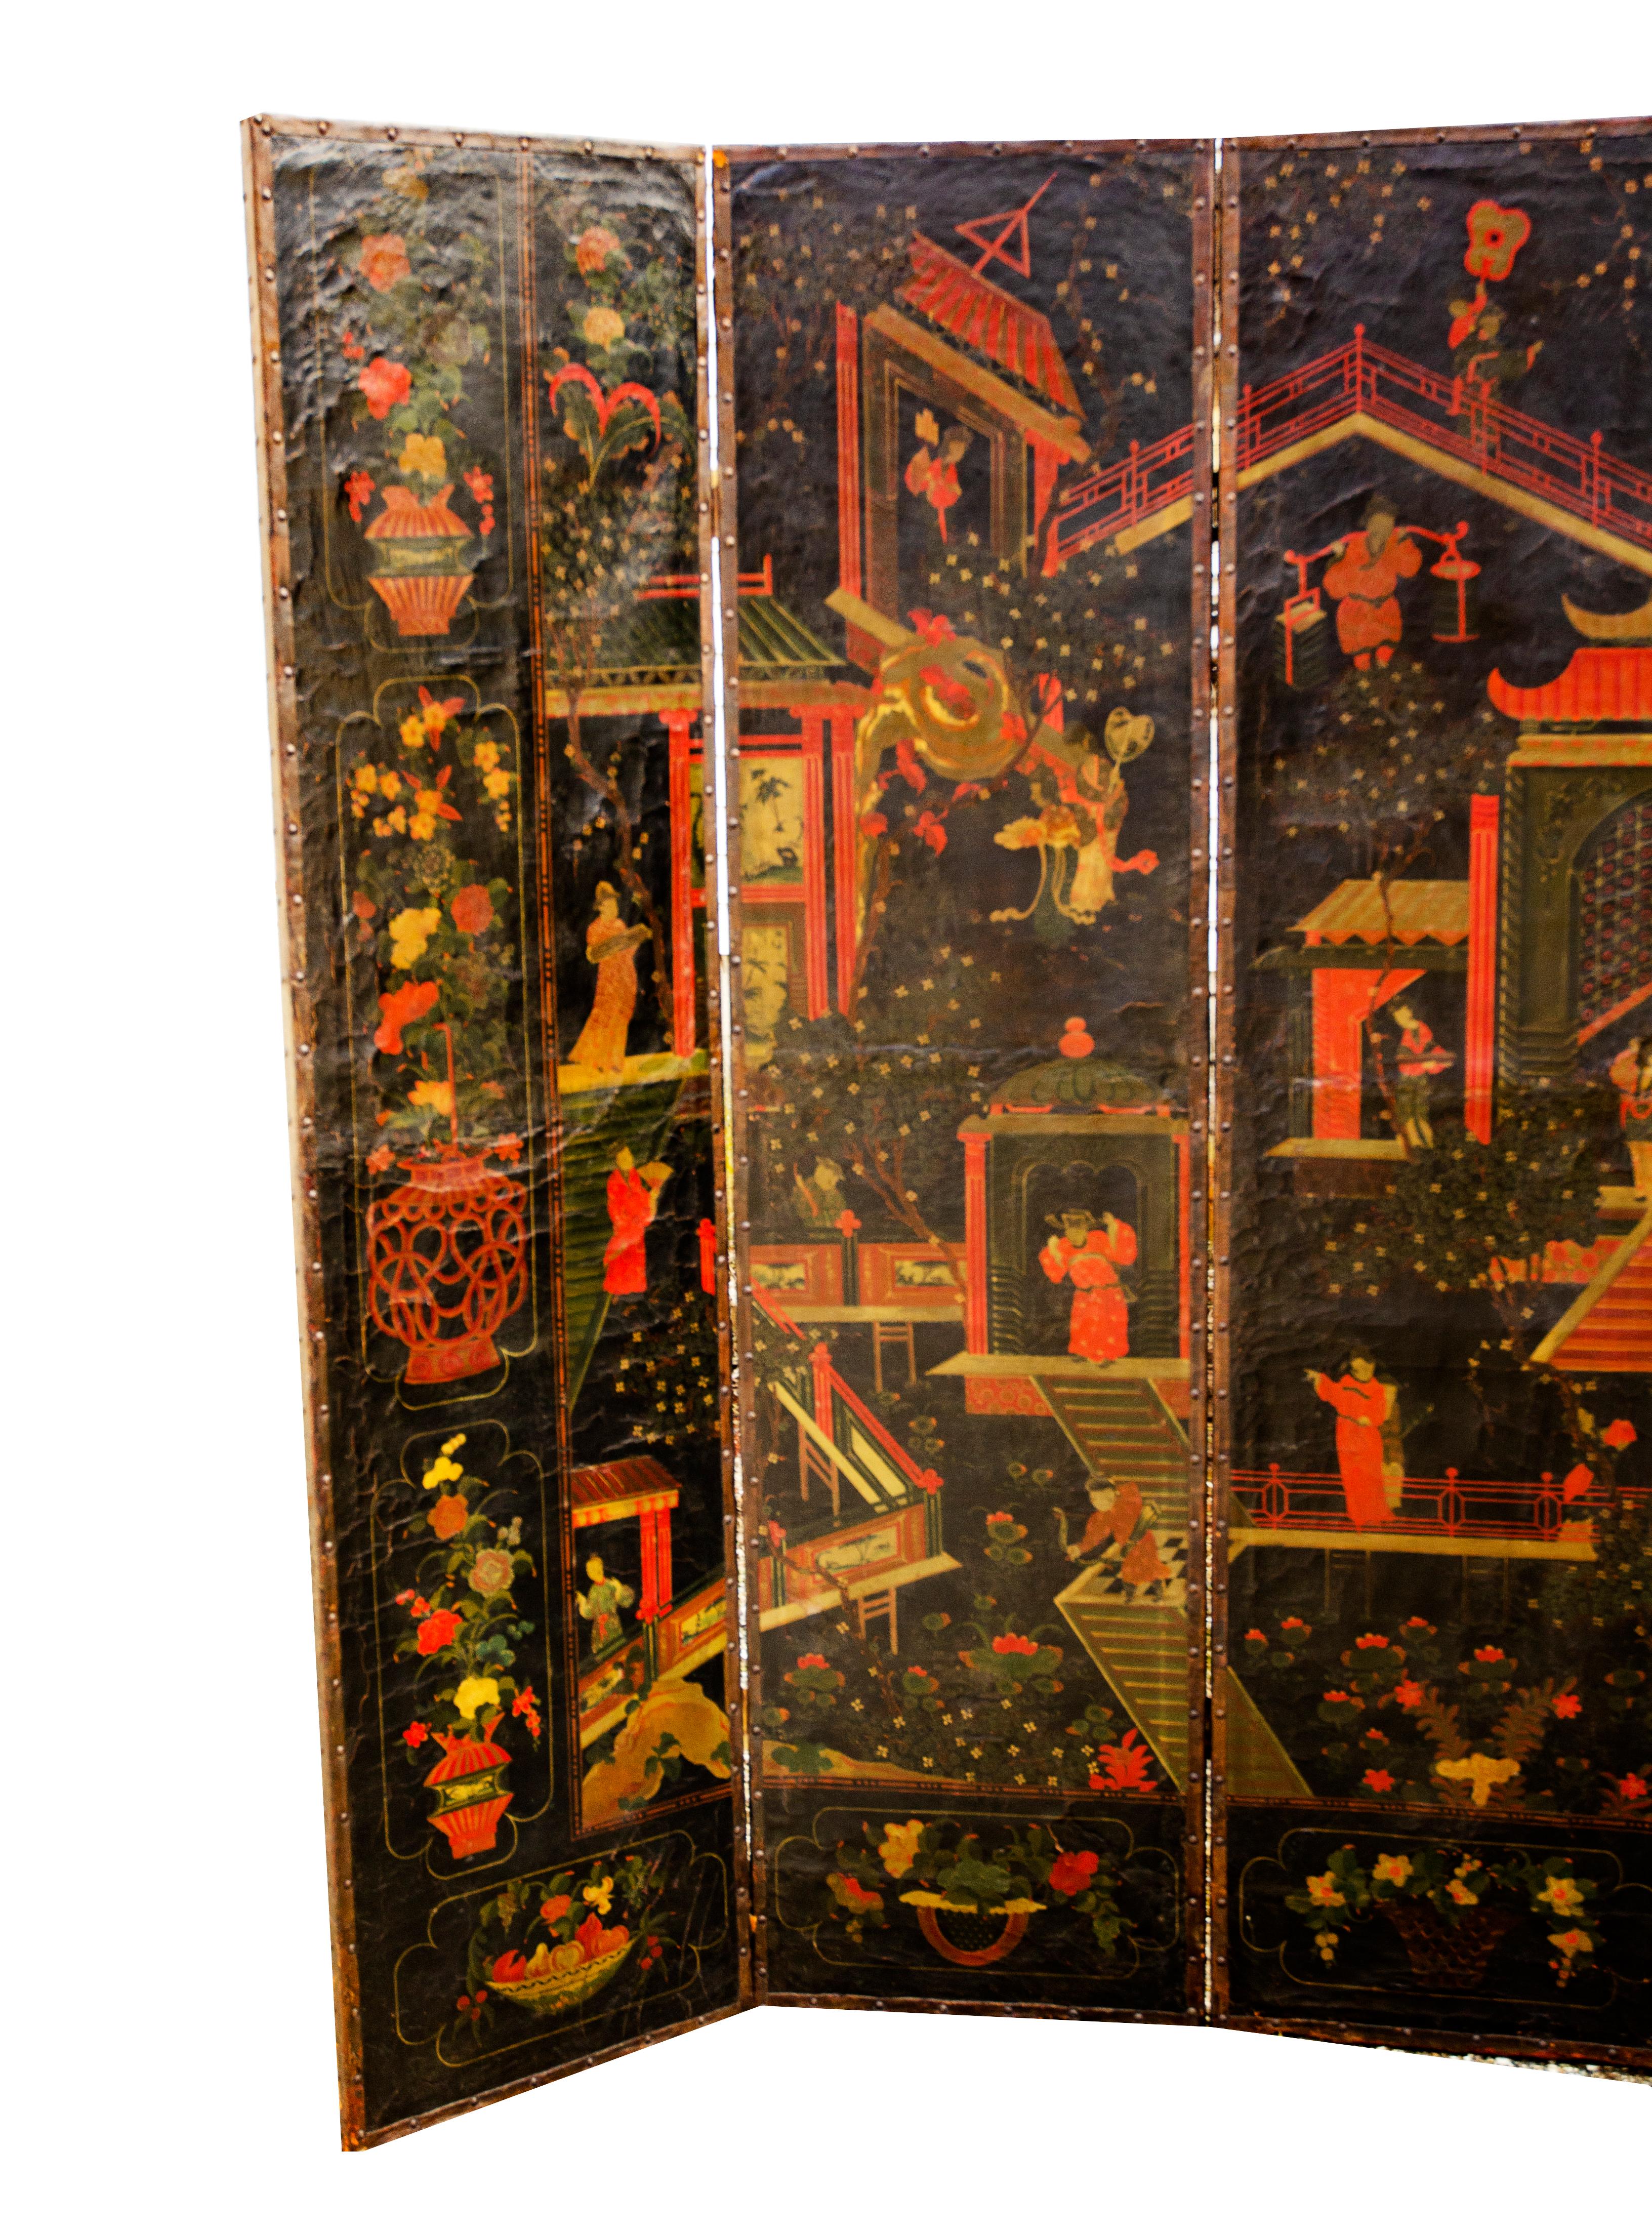 Tall grand scale with six panels with reds and greens on a black background. Decorated with pagodas and people doing a variety of whimsical things.